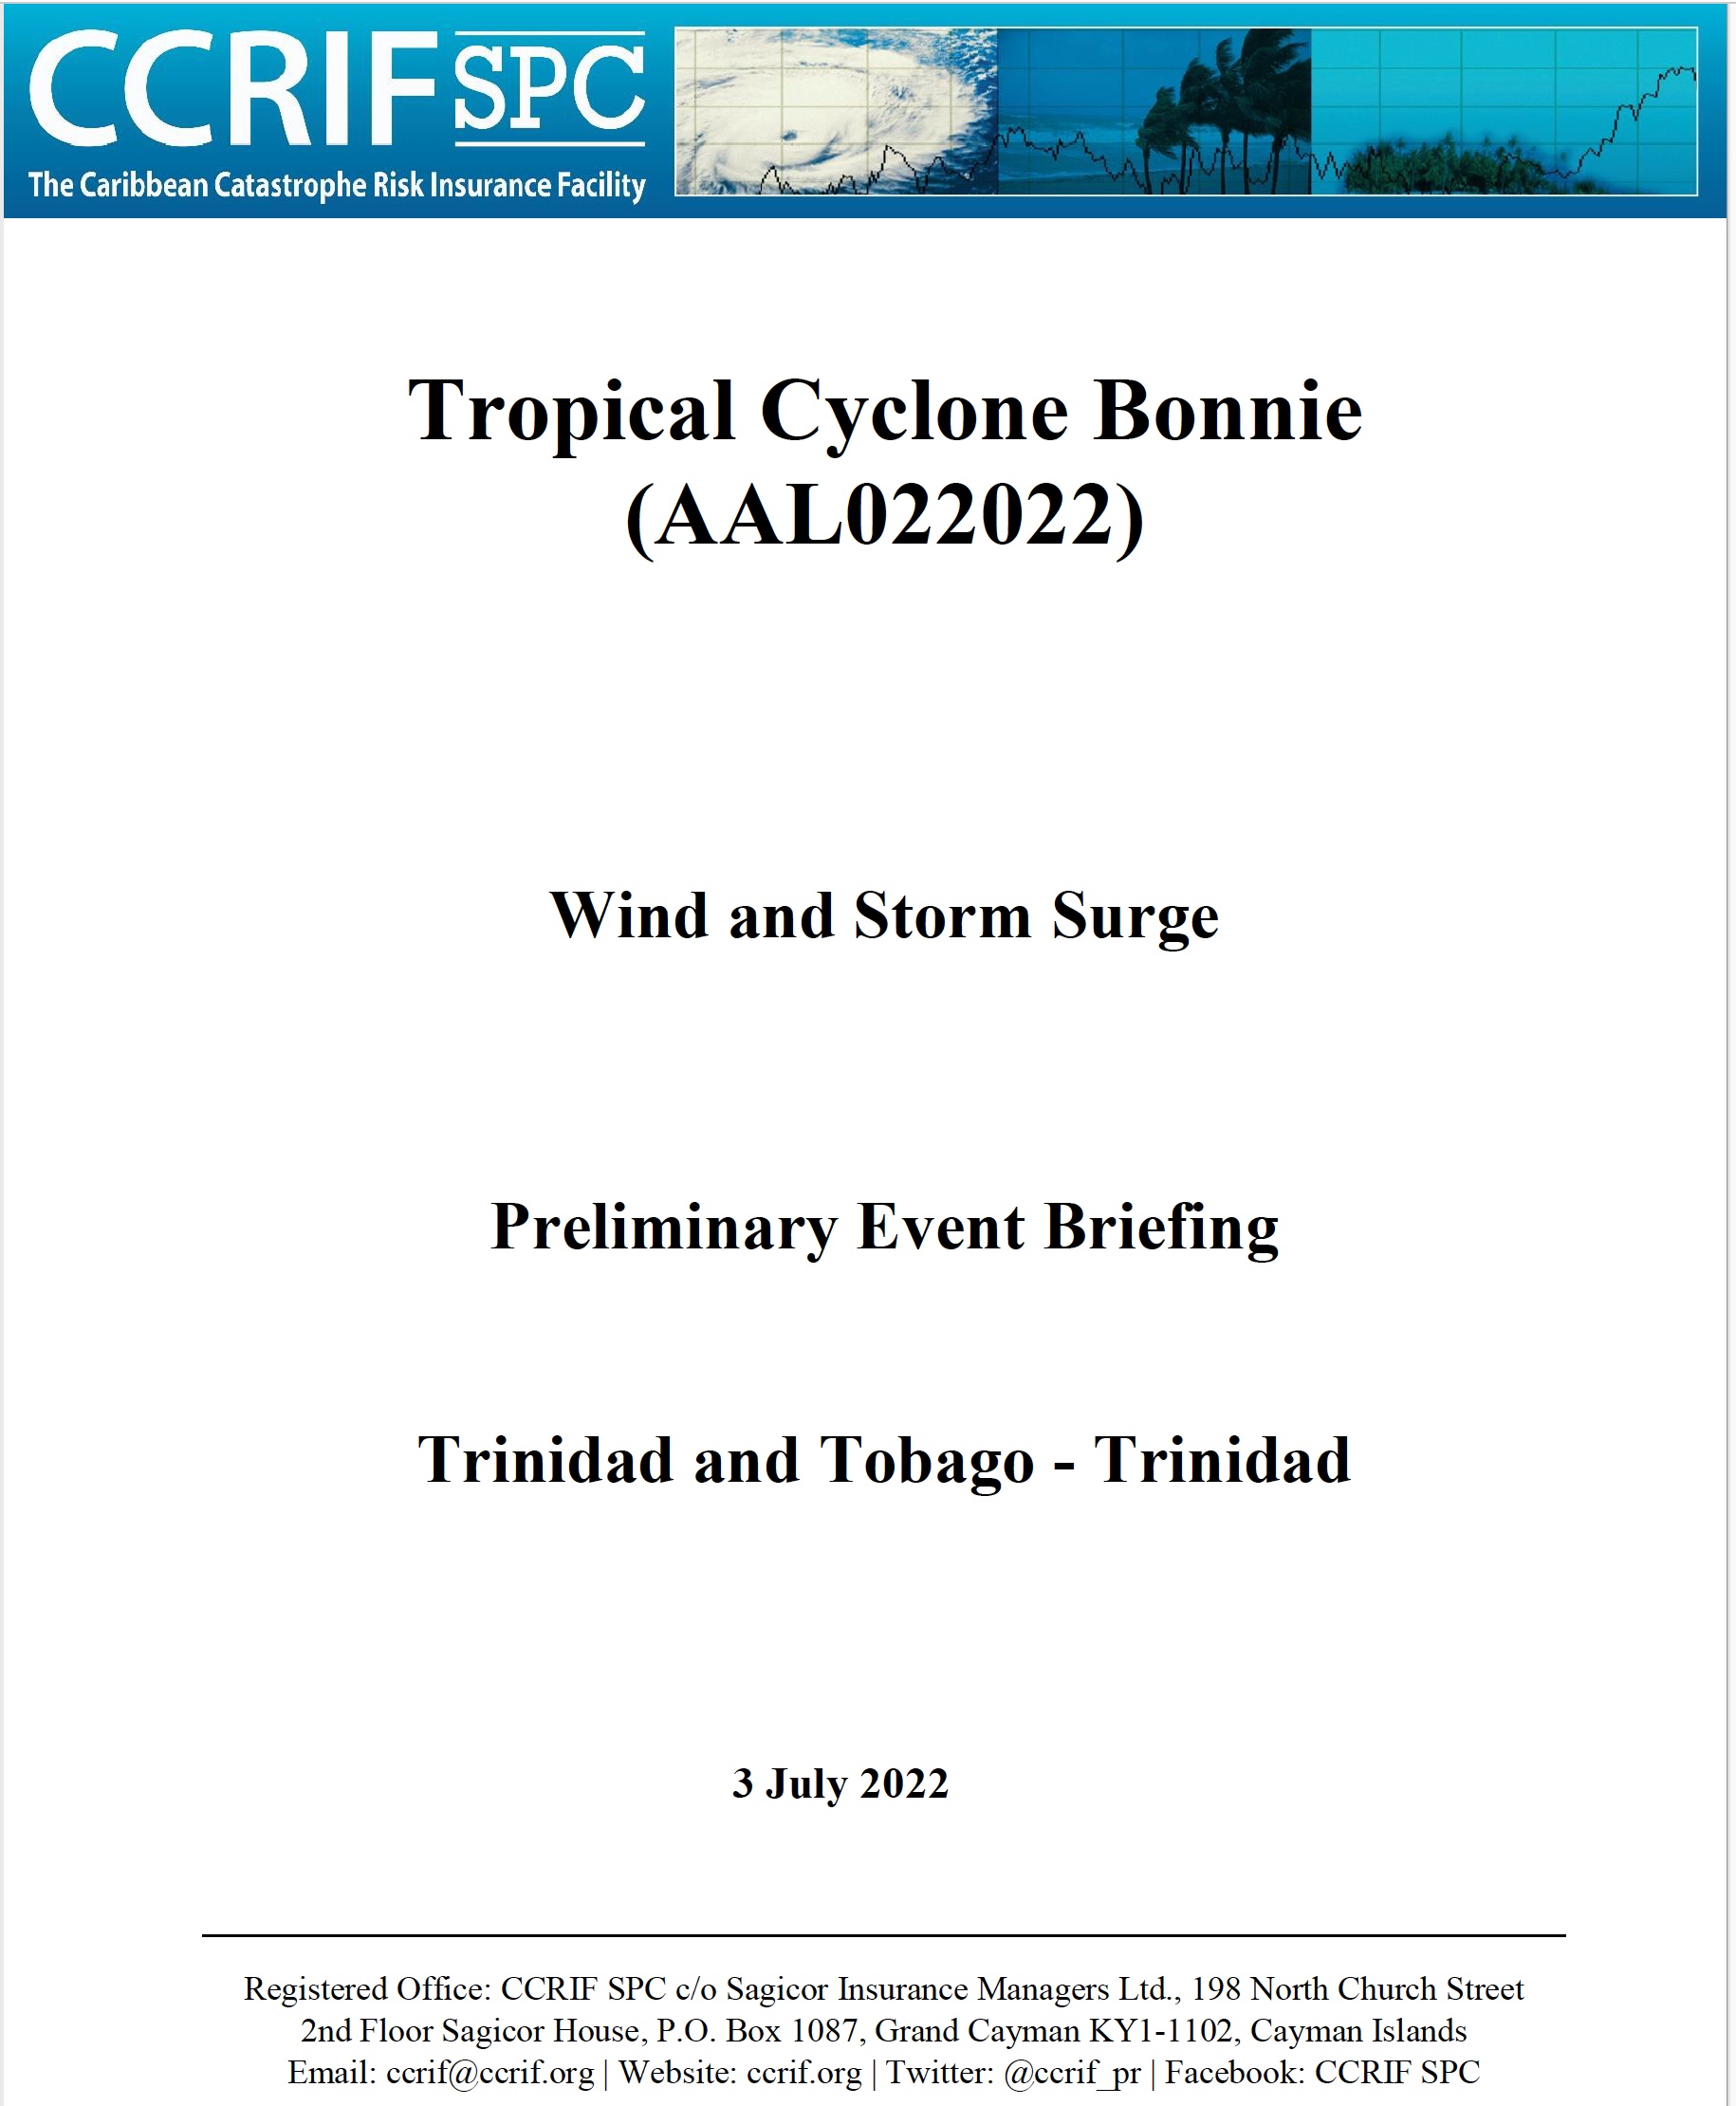 Preliminary Event Briefing - Wind and Storm Surge - Trinidad and Tobago - July 3 2022